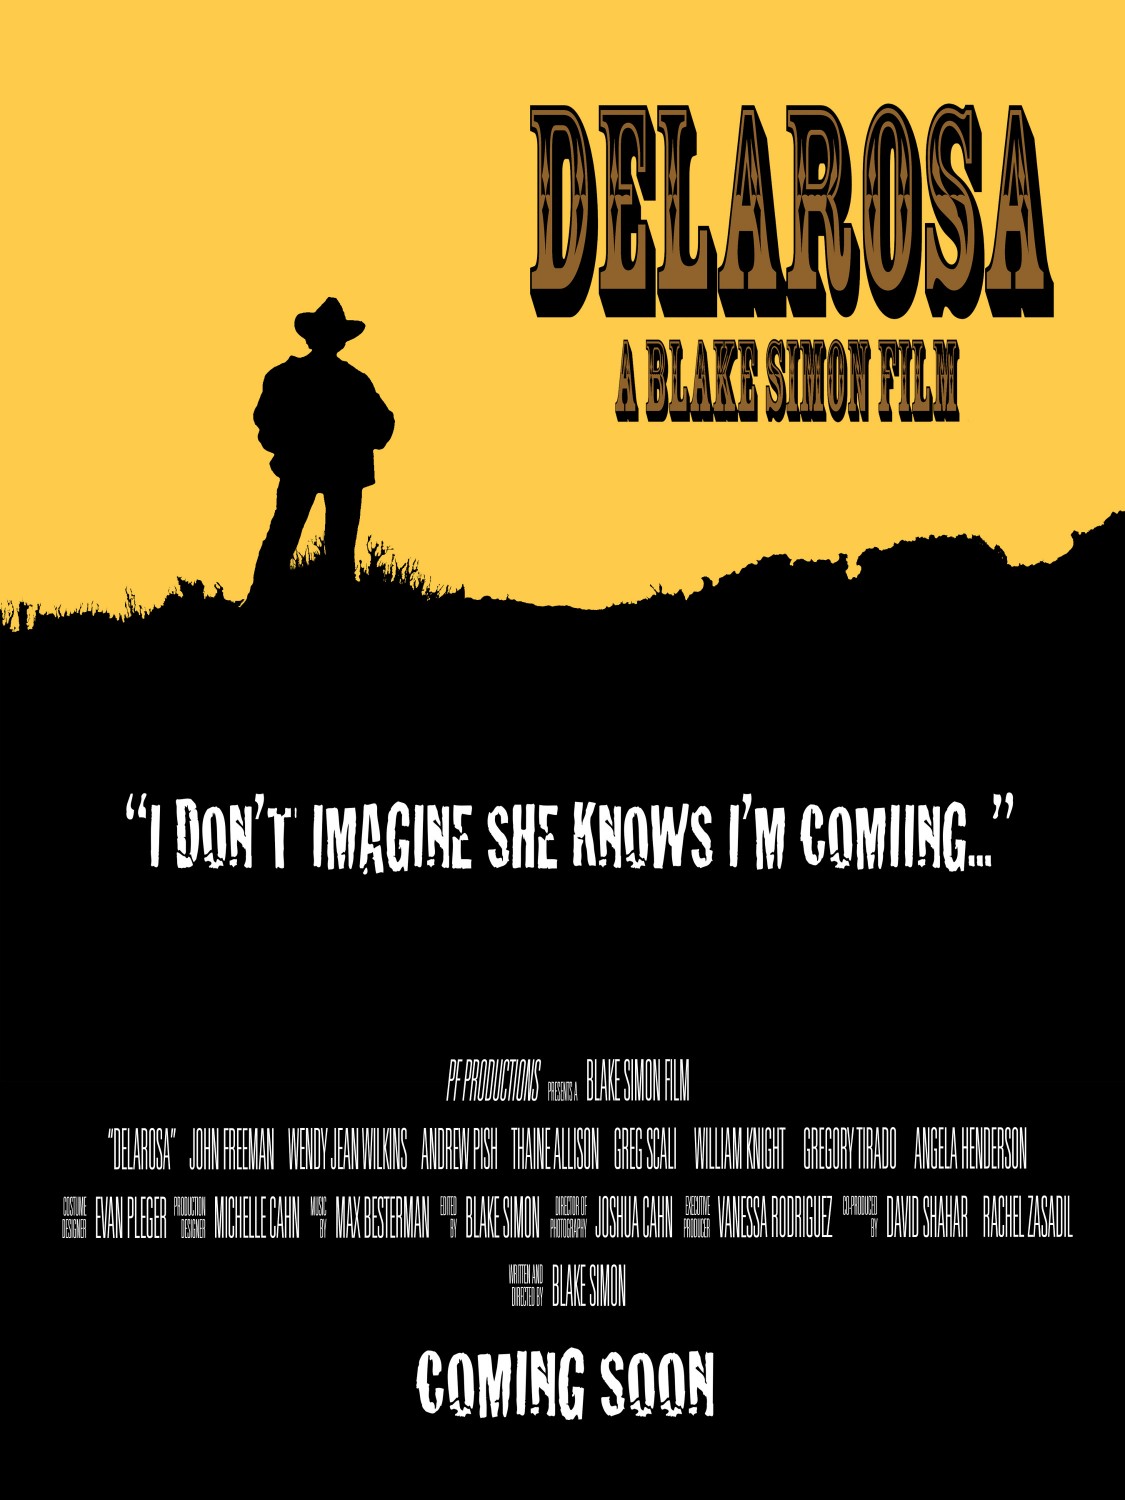 Extra Large Movie Poster Image for Delarosa